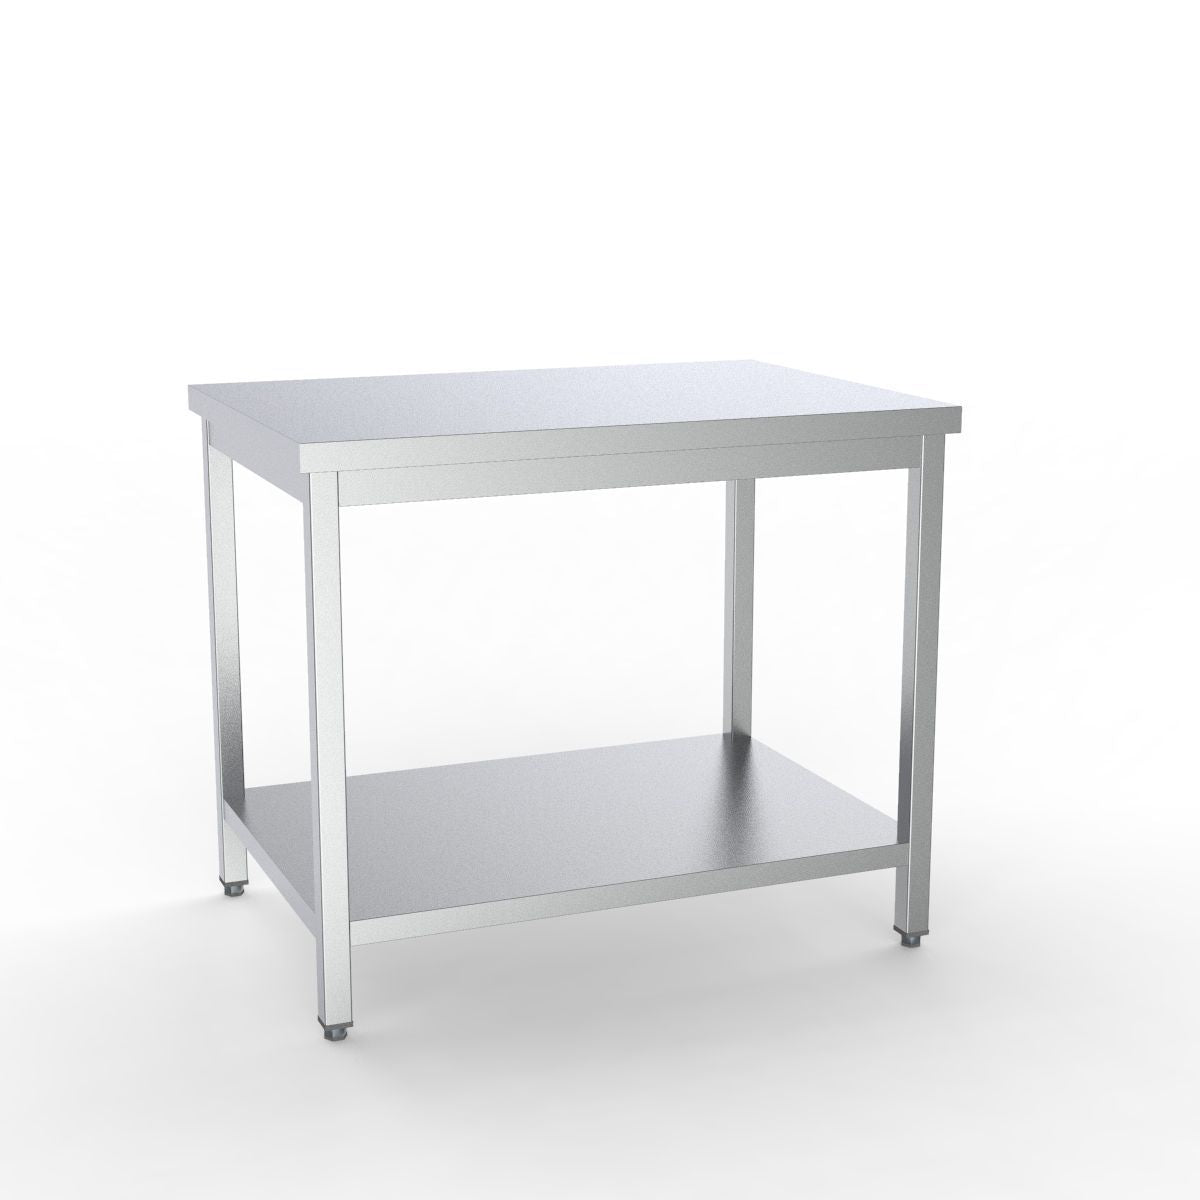 Combisteel Full 430 Stainless Steel 700 Line Worktable With Shelf 800mm Wide - 7333.0076